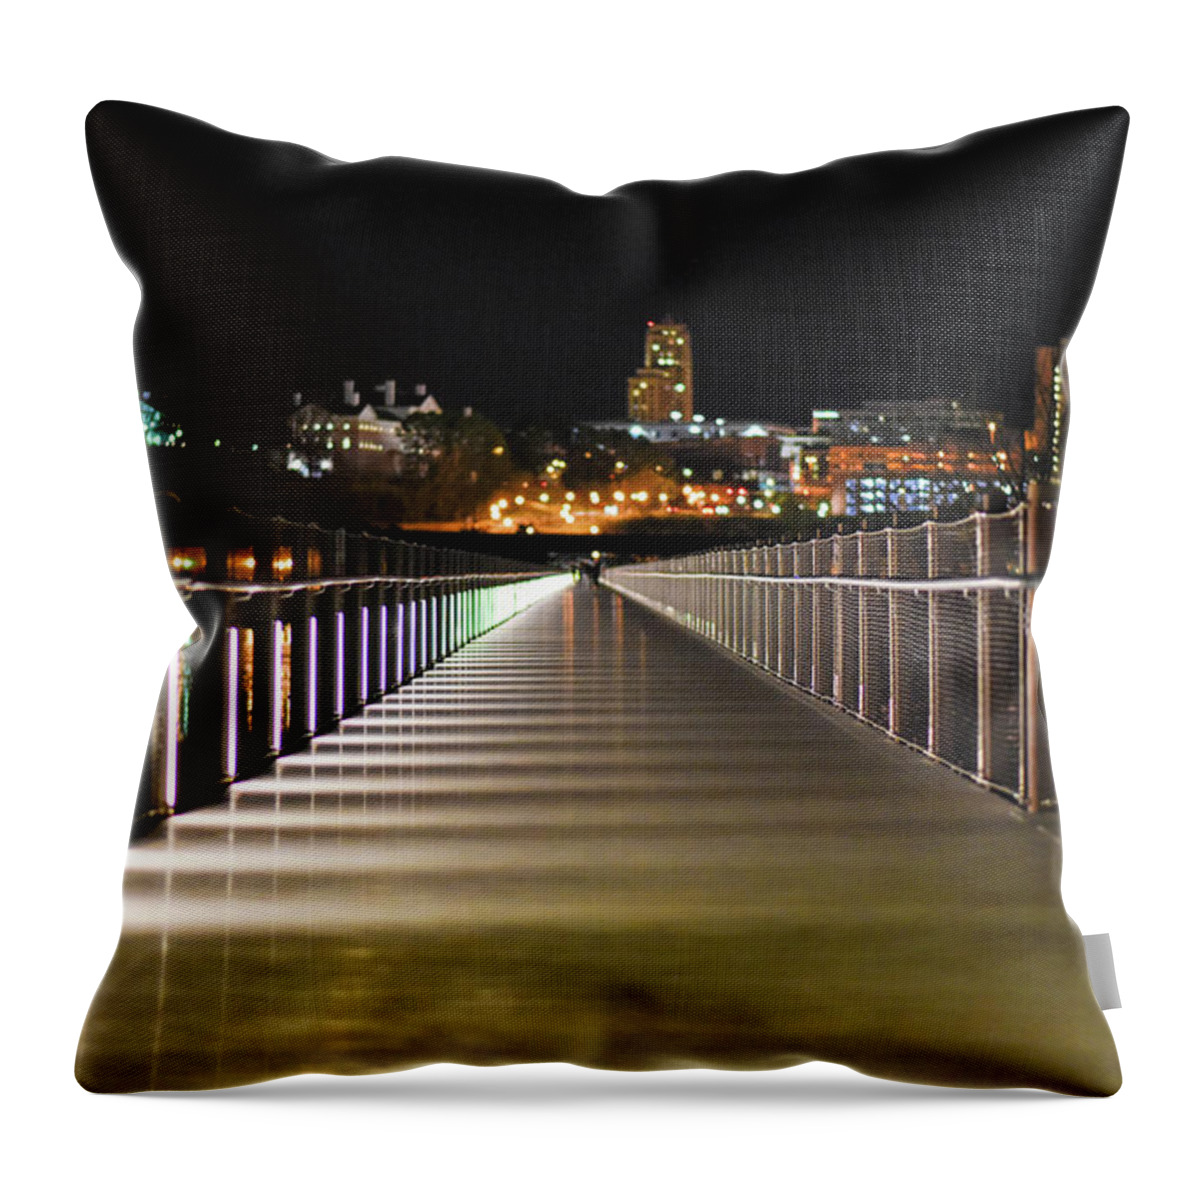 Rva Throw Pillow featuring the photograph Tyler Potterfield Bridge At Night by Doug Ash